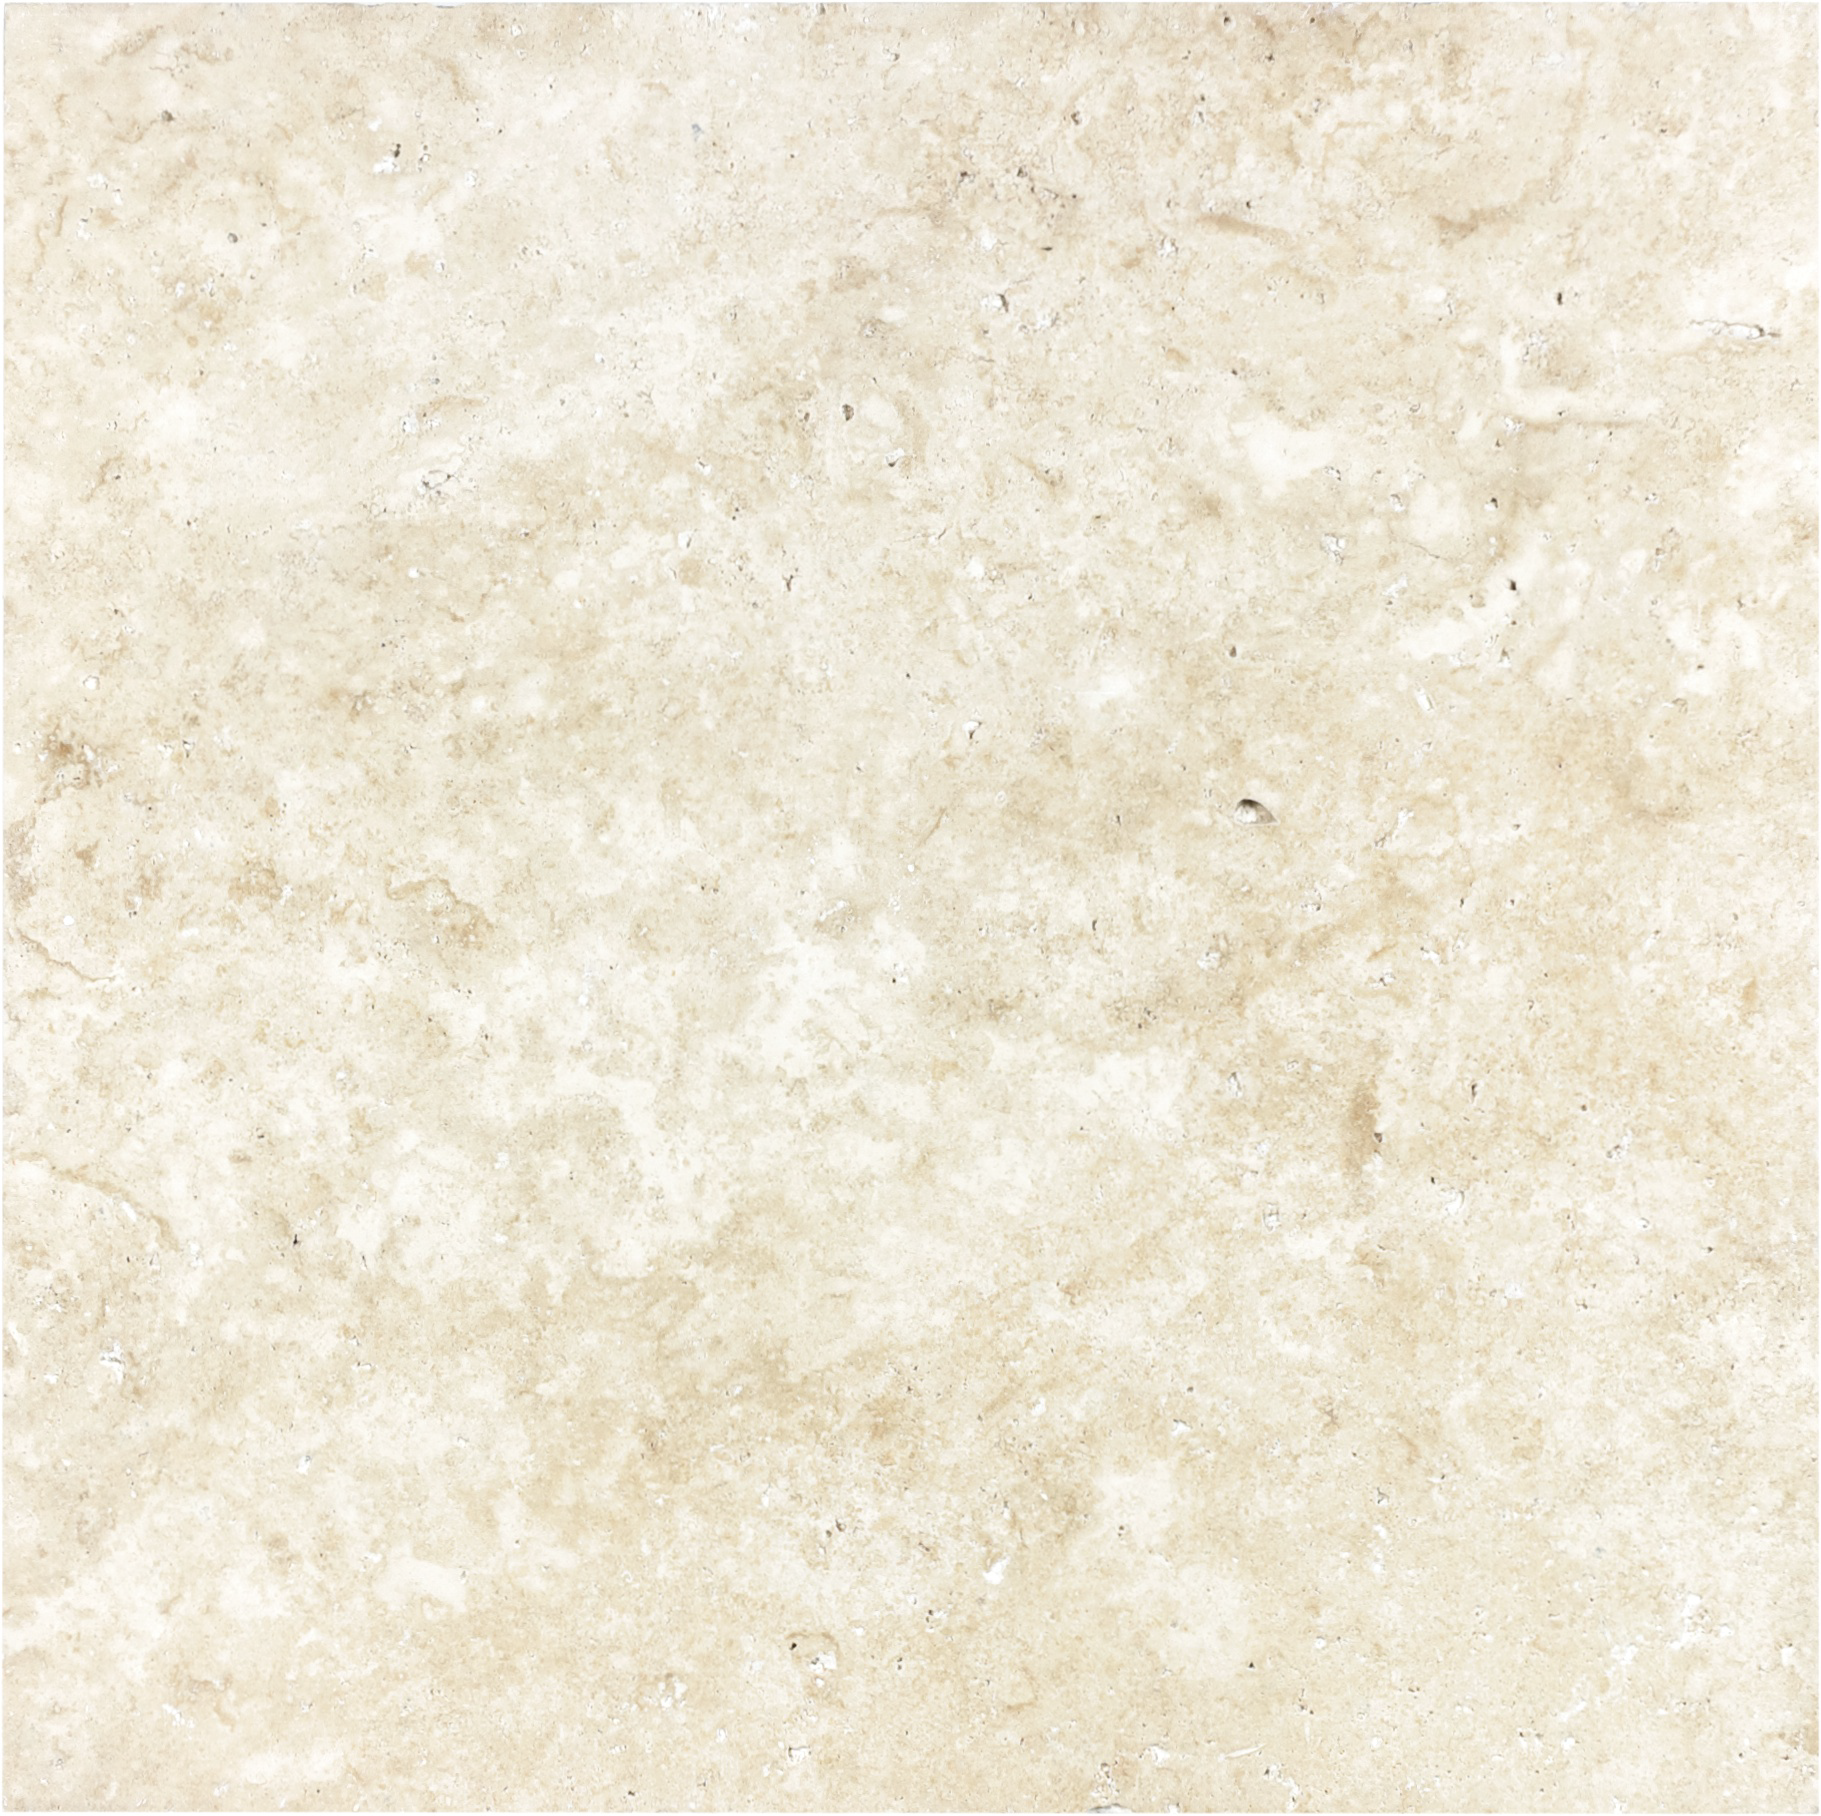 travertine pattern natural stone field tile from ivory anatolia collection distributed by surface group international brushed finish straight edge edge 16x16 square shape